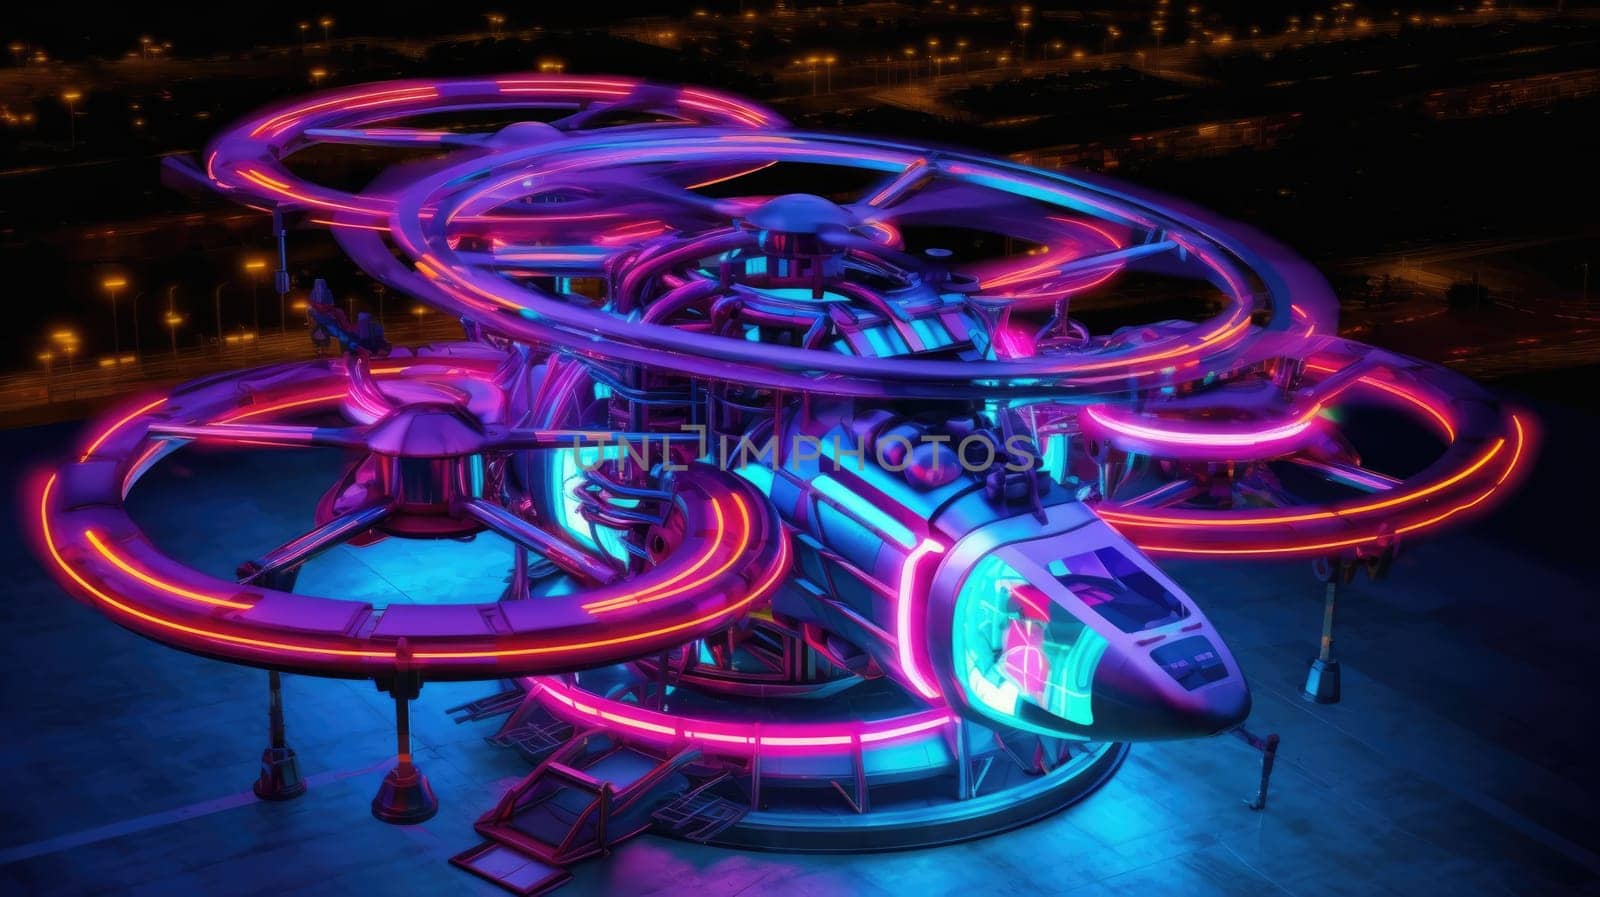 Futuristic helicopter with neon lights in a cyberpunk style. Isolated on black background, great for websites, presentations, and social media. Ideal for futuristic projects.